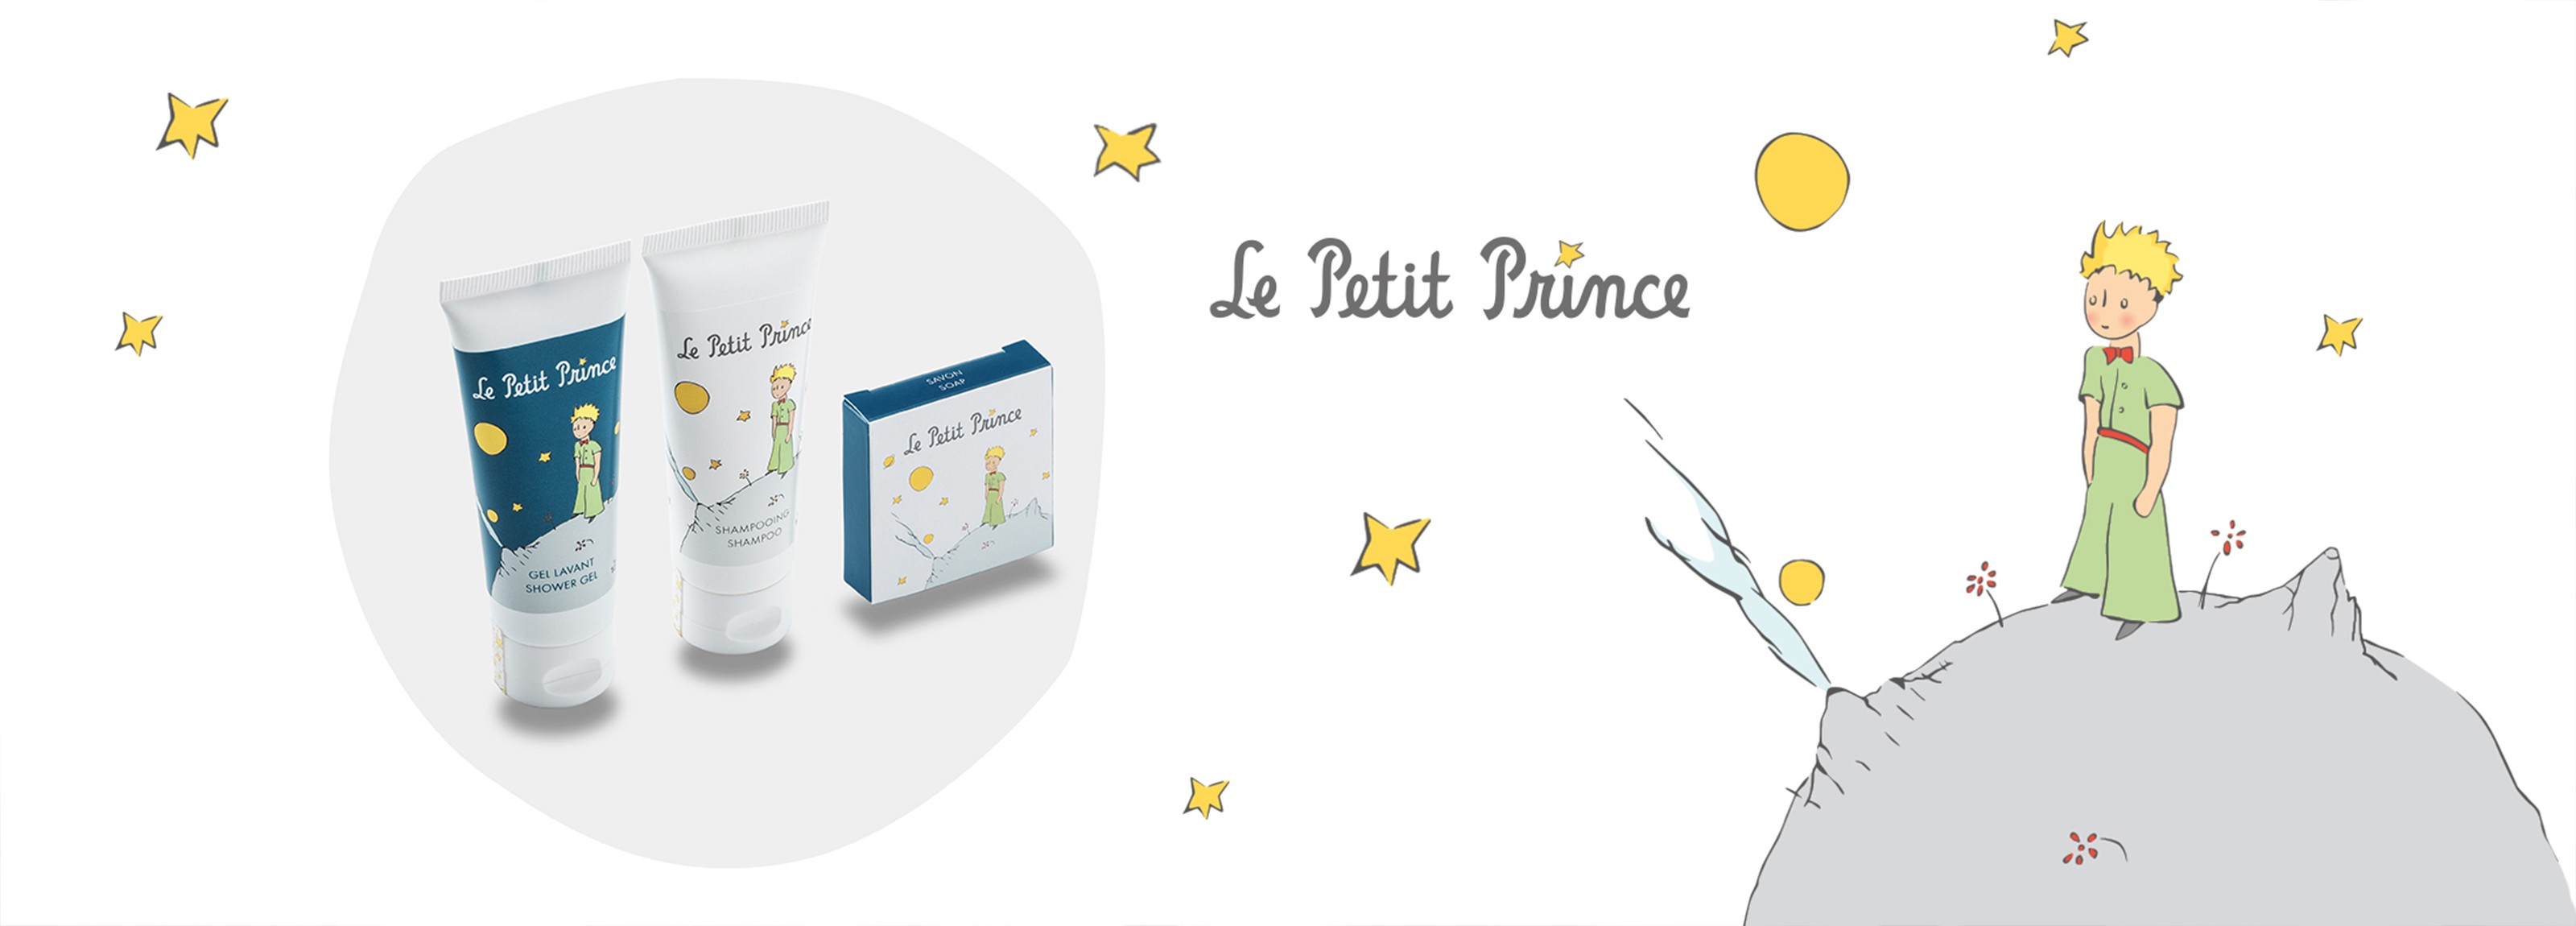 le petit prince illustration and bathroom products